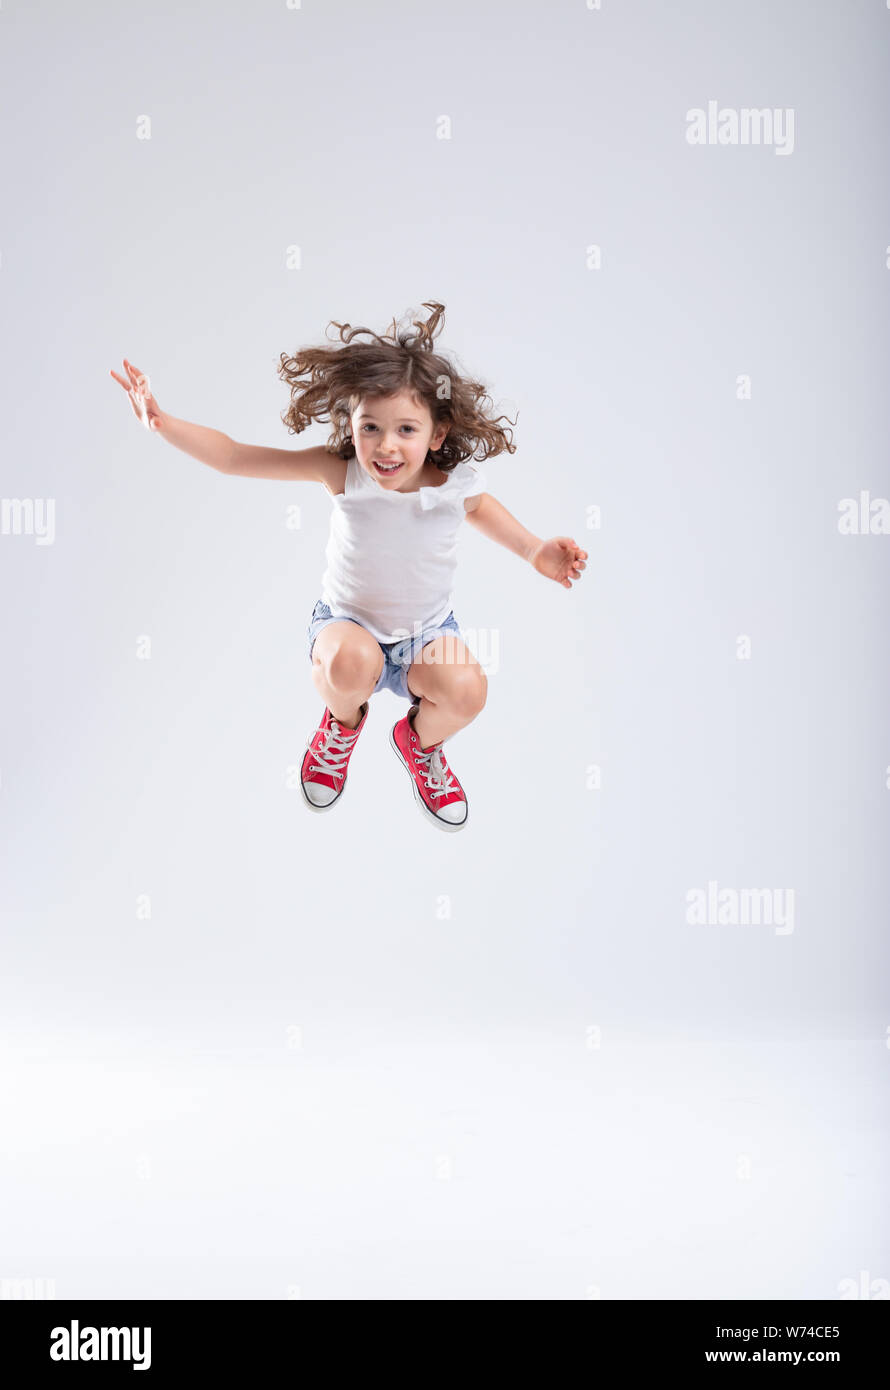 Energetic little girl jumping high into the air with bent knees and a happy smile in her red sneakers over a white background with copy space Stock Photo